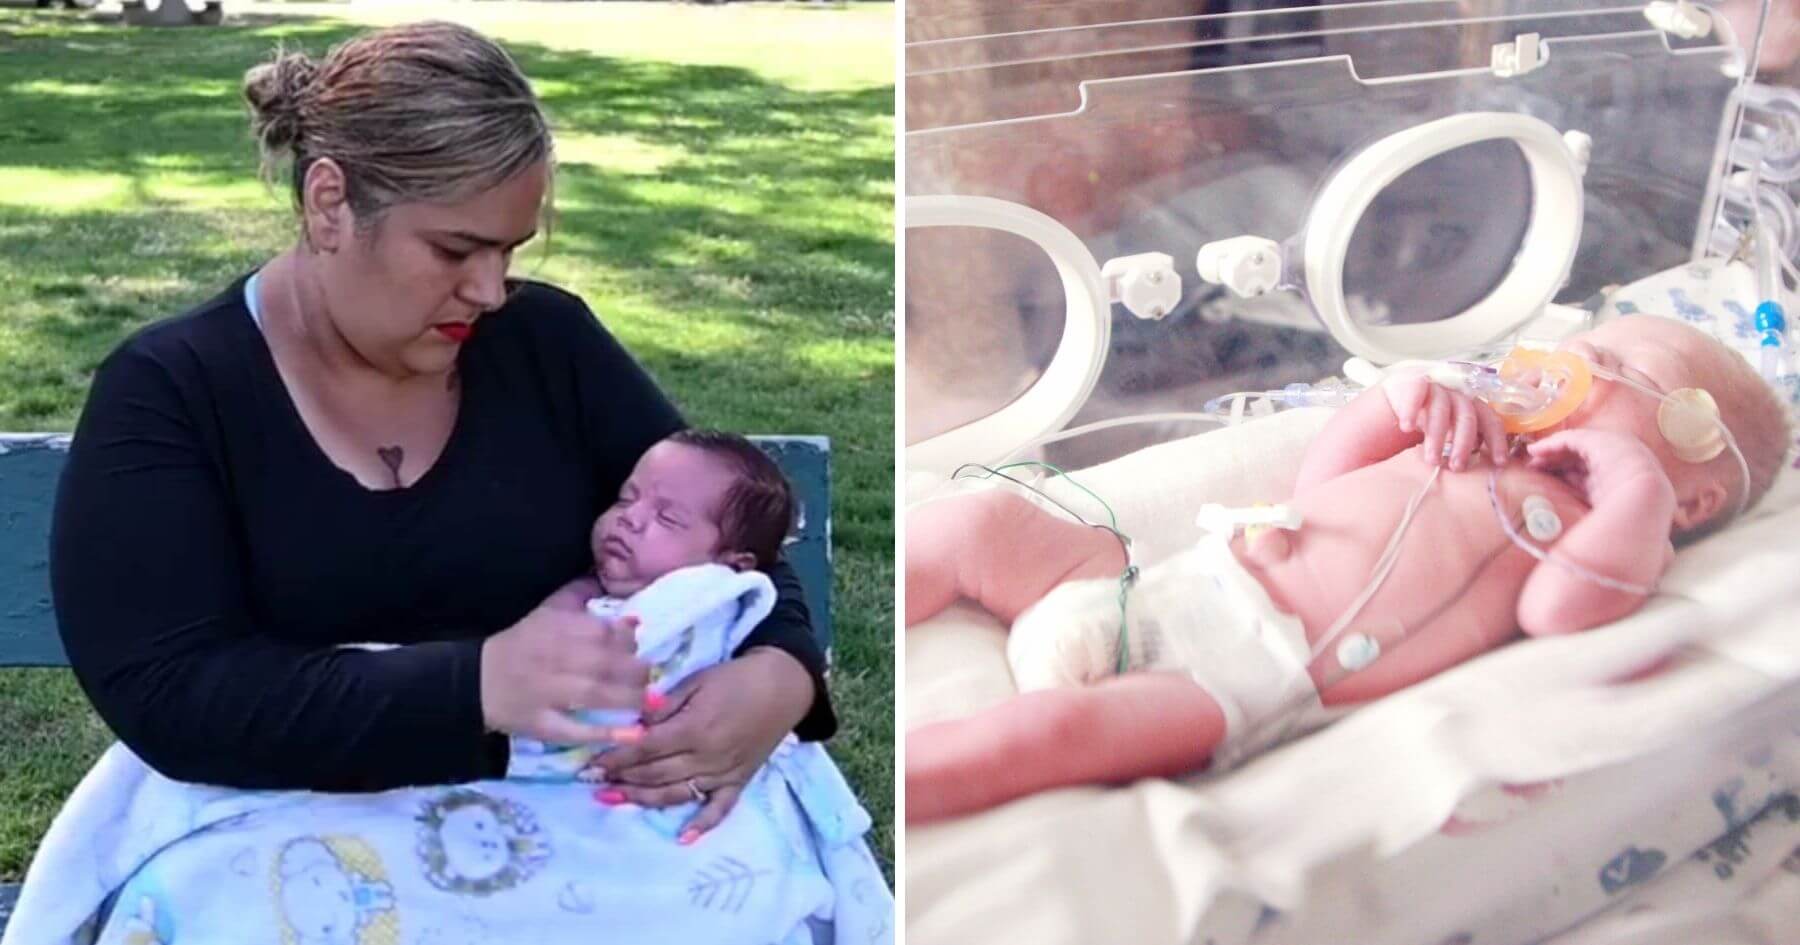 Woman who delivered baby prematurely while in a coma due to COVID-19 has recovered along with her son